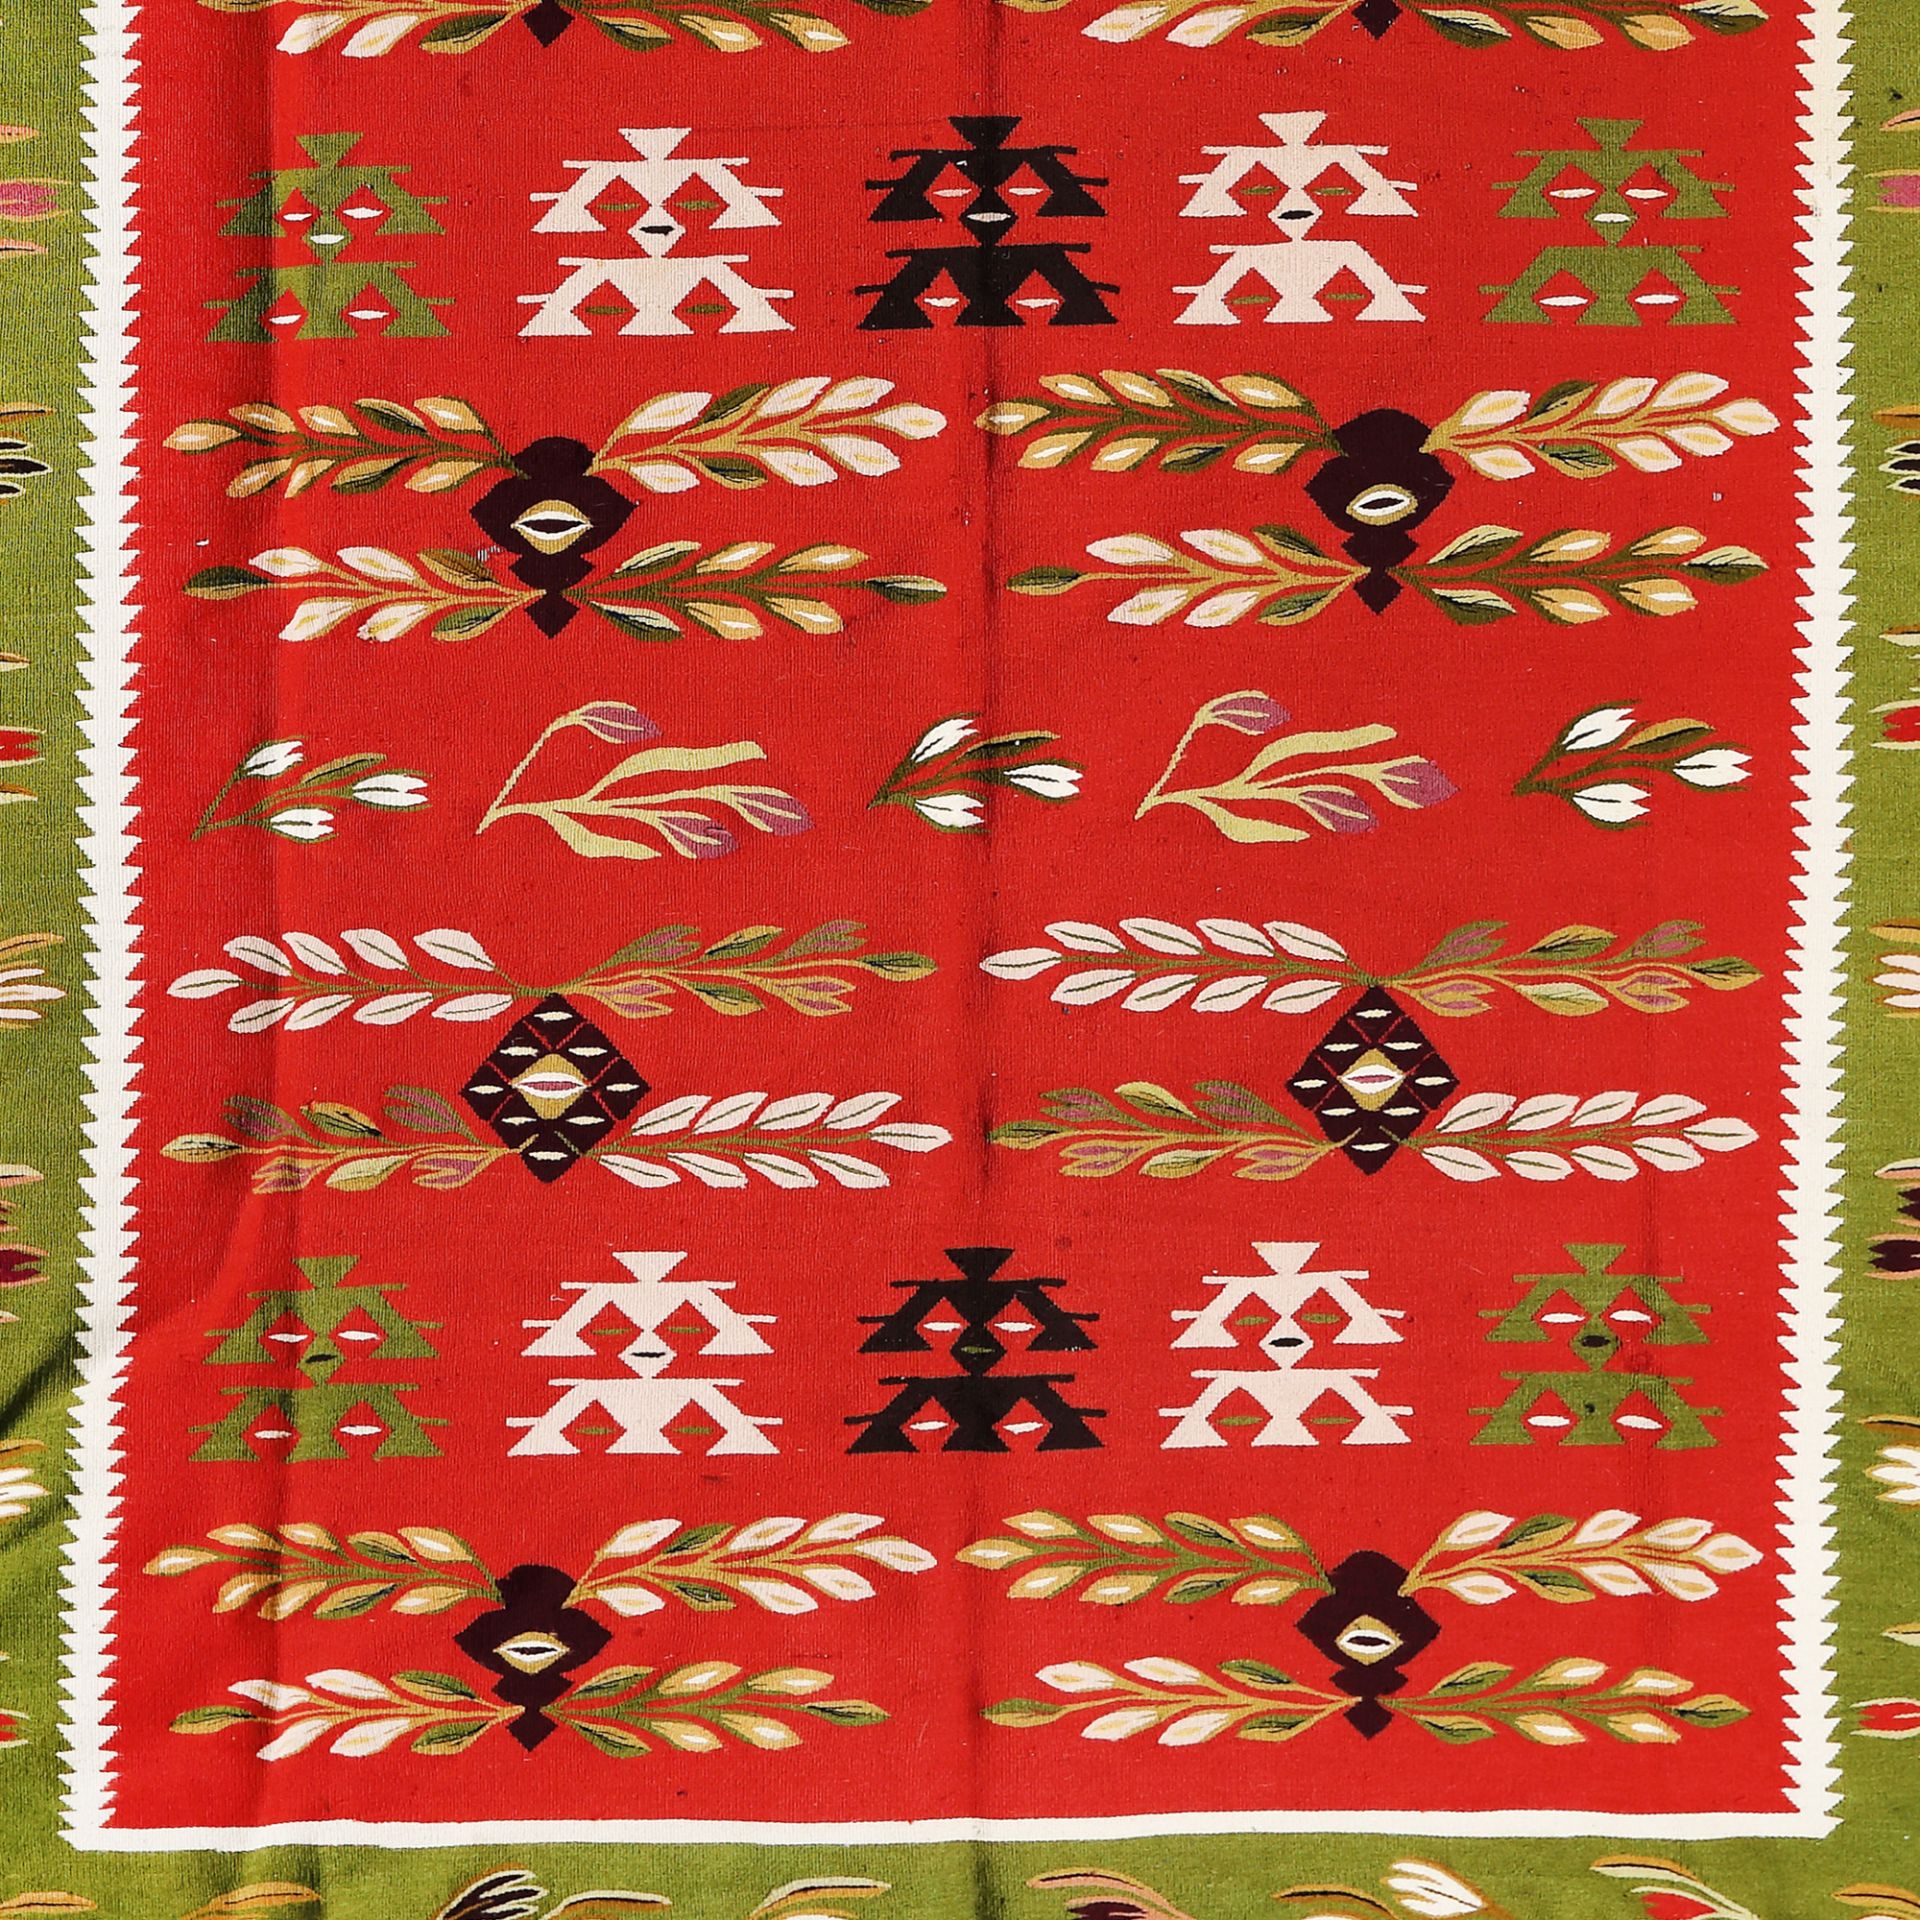 Oltenian wool rug, decorated with floral motifs - Image 2 of 2